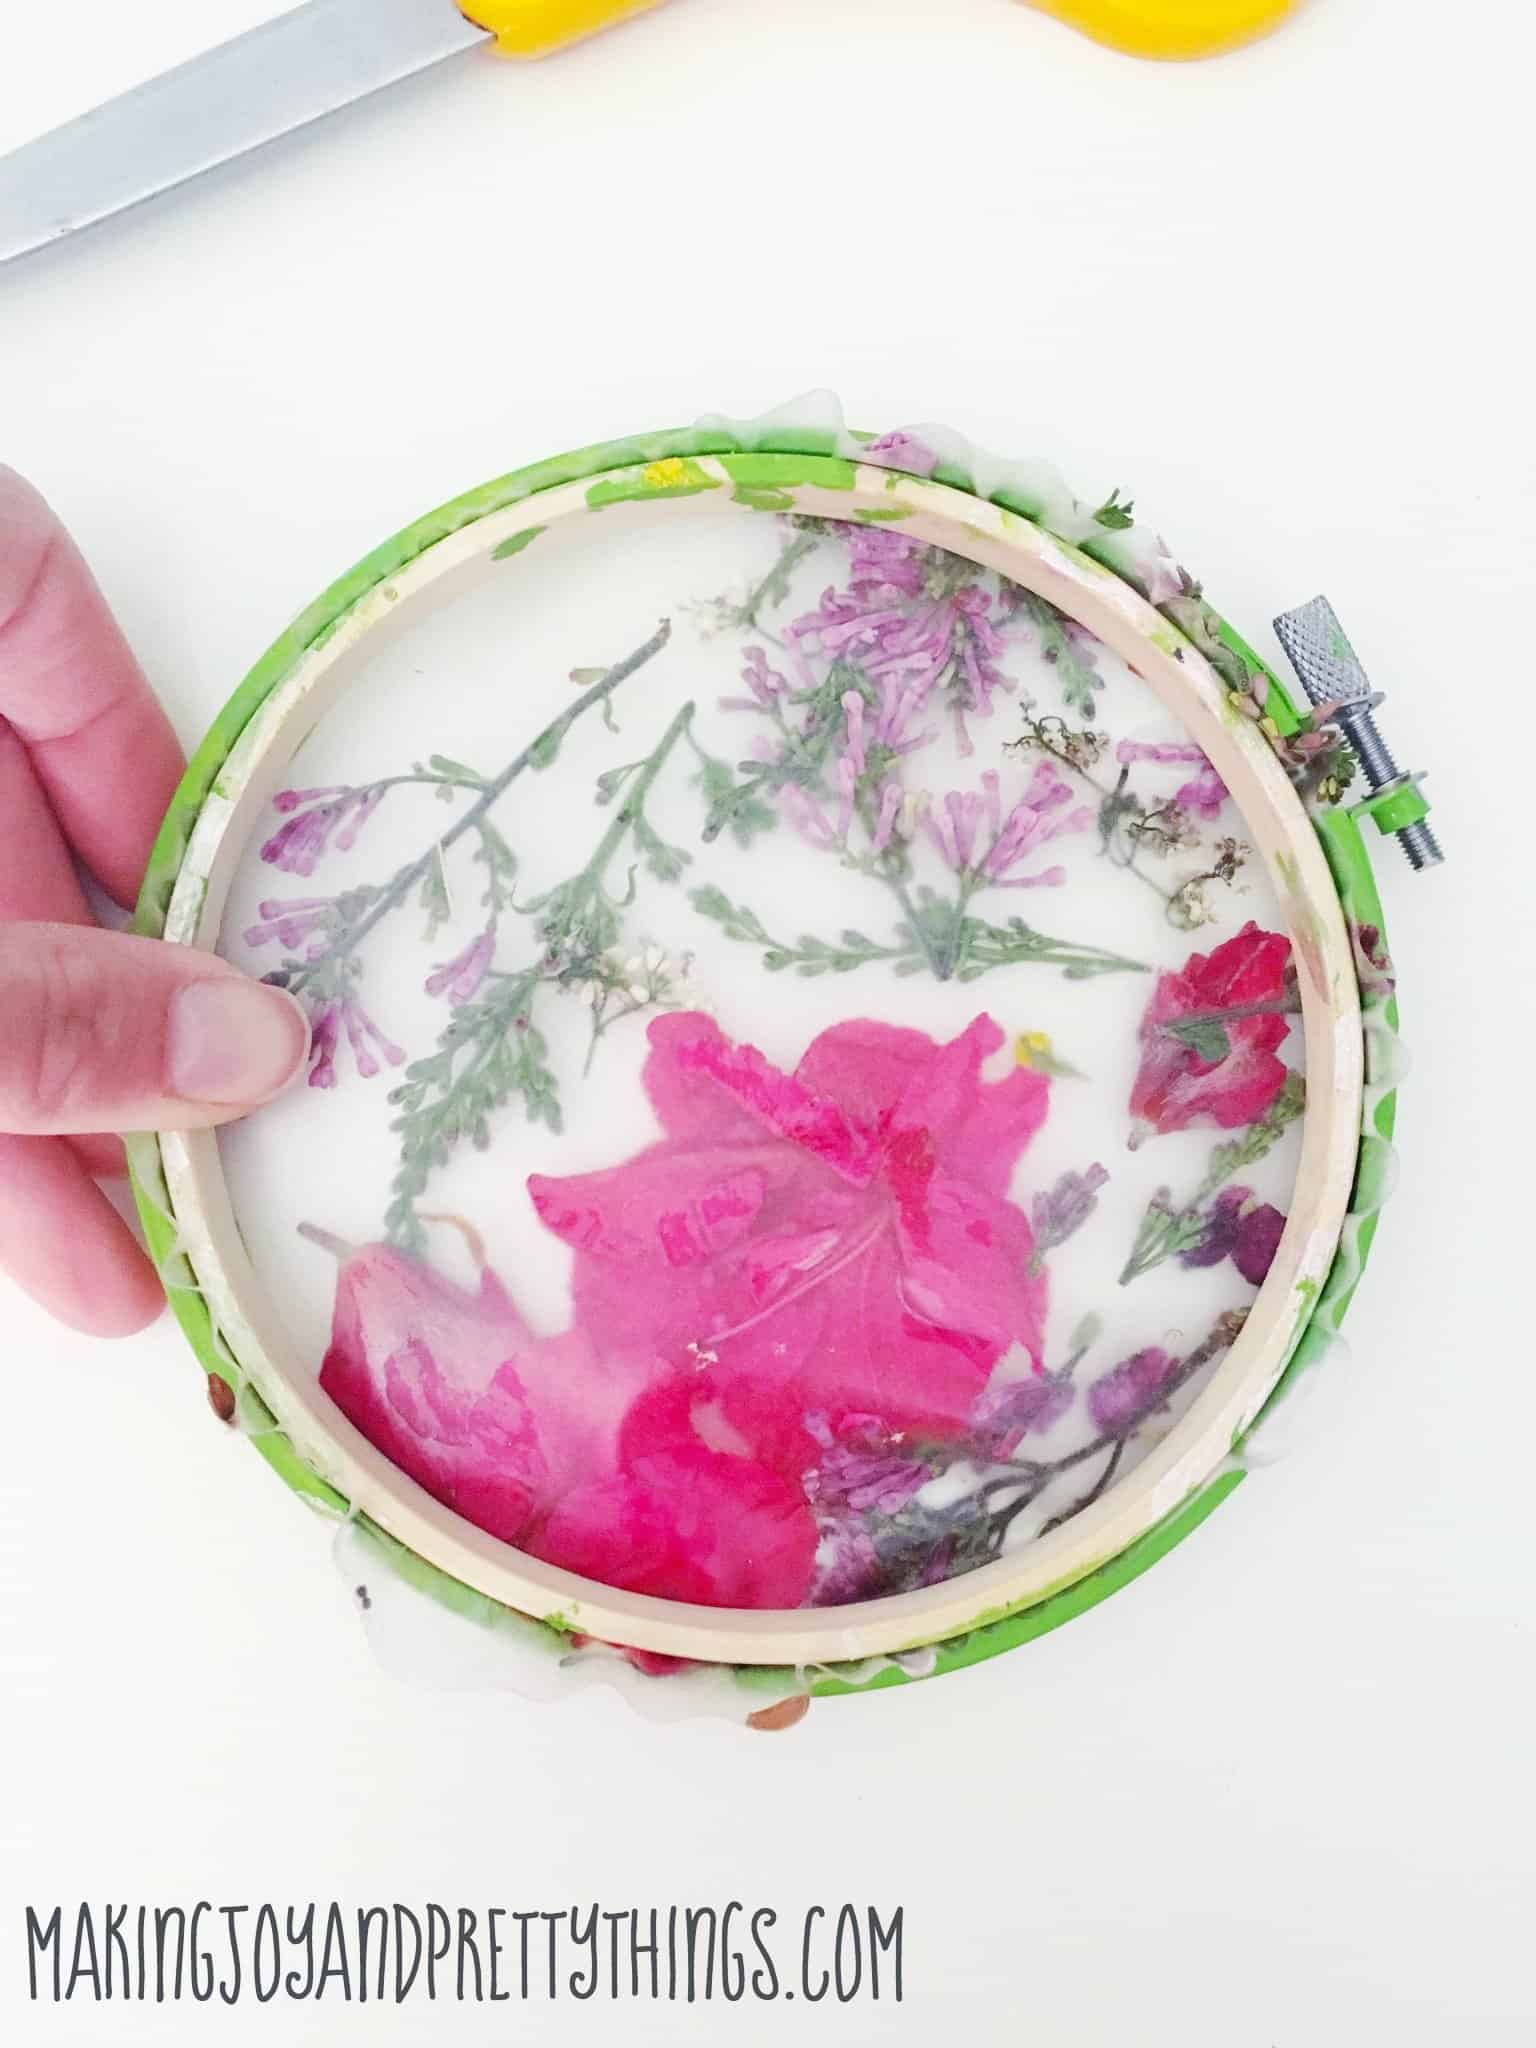 A look at the almost-completed pressed flower suncatcher. Two small wood embroidery hoops hold a contact paper filled with pressed pink and purple flower petals. The embroidery hoop is painted yellow and green.